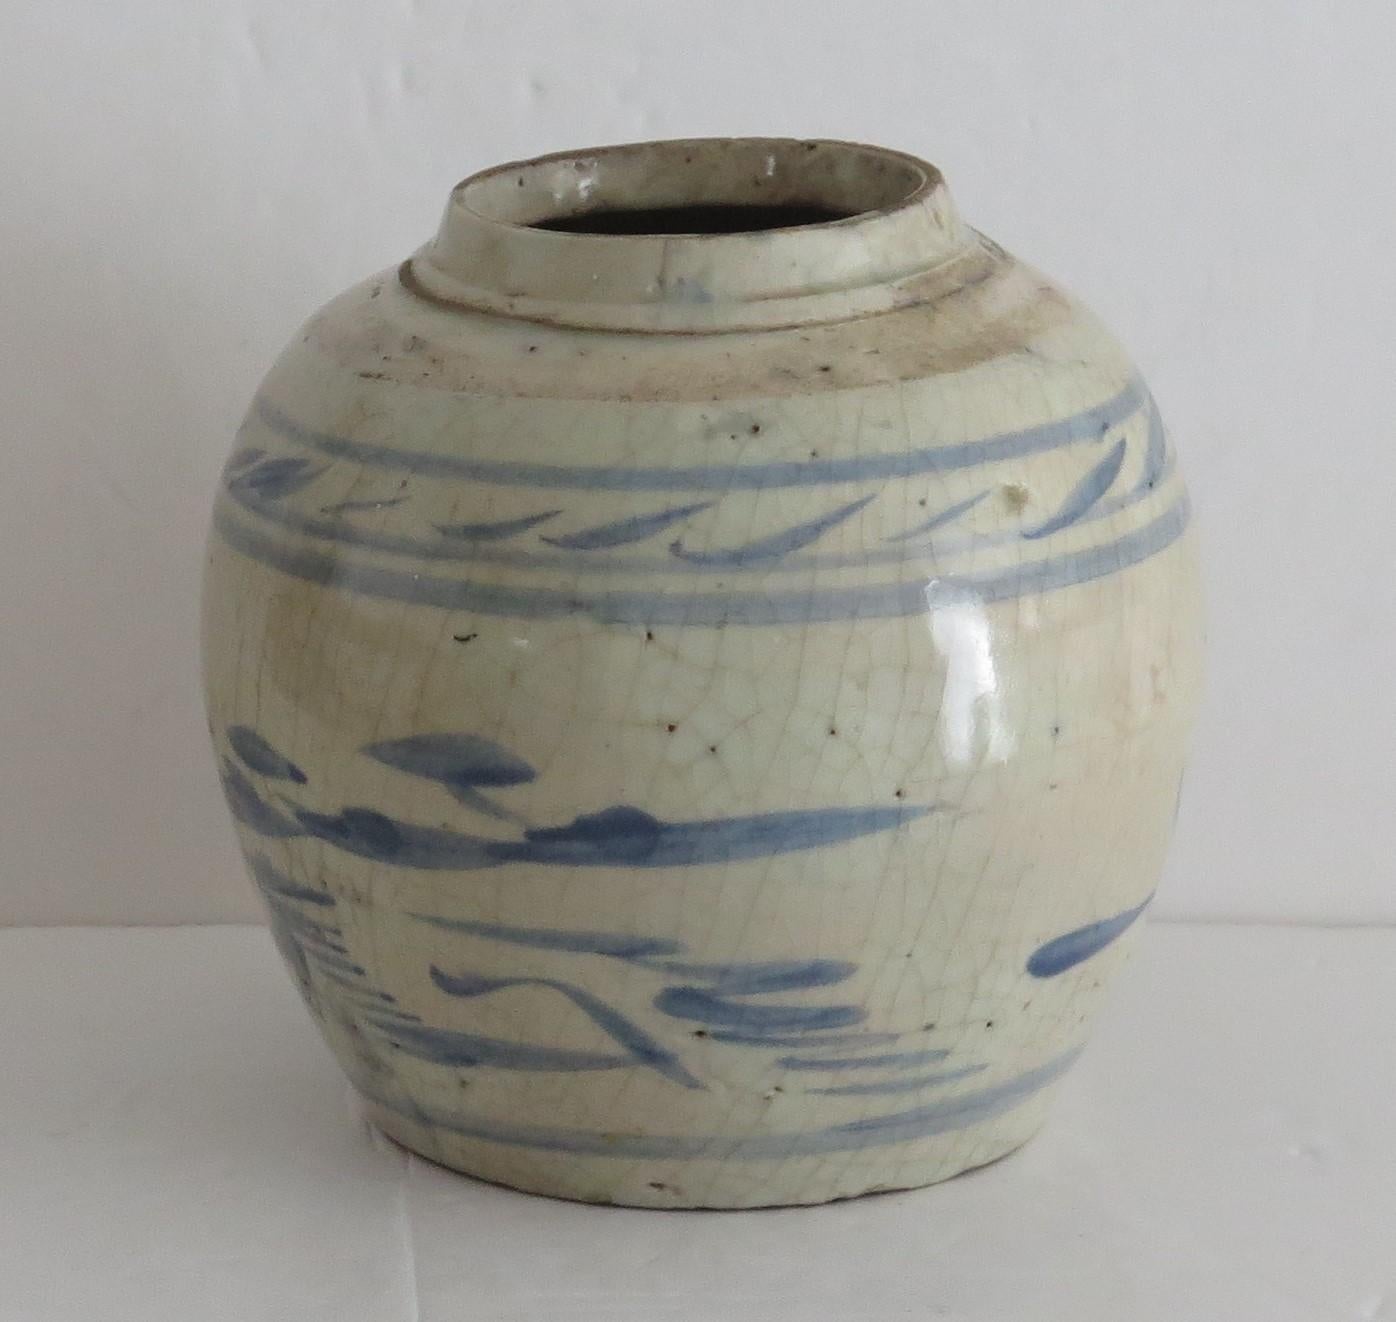 Chinese Export Jar Provincial Hand Painted ceramic, 17th Century late Ming In Good Condition For Sale In Lincoln, Lincolnshire